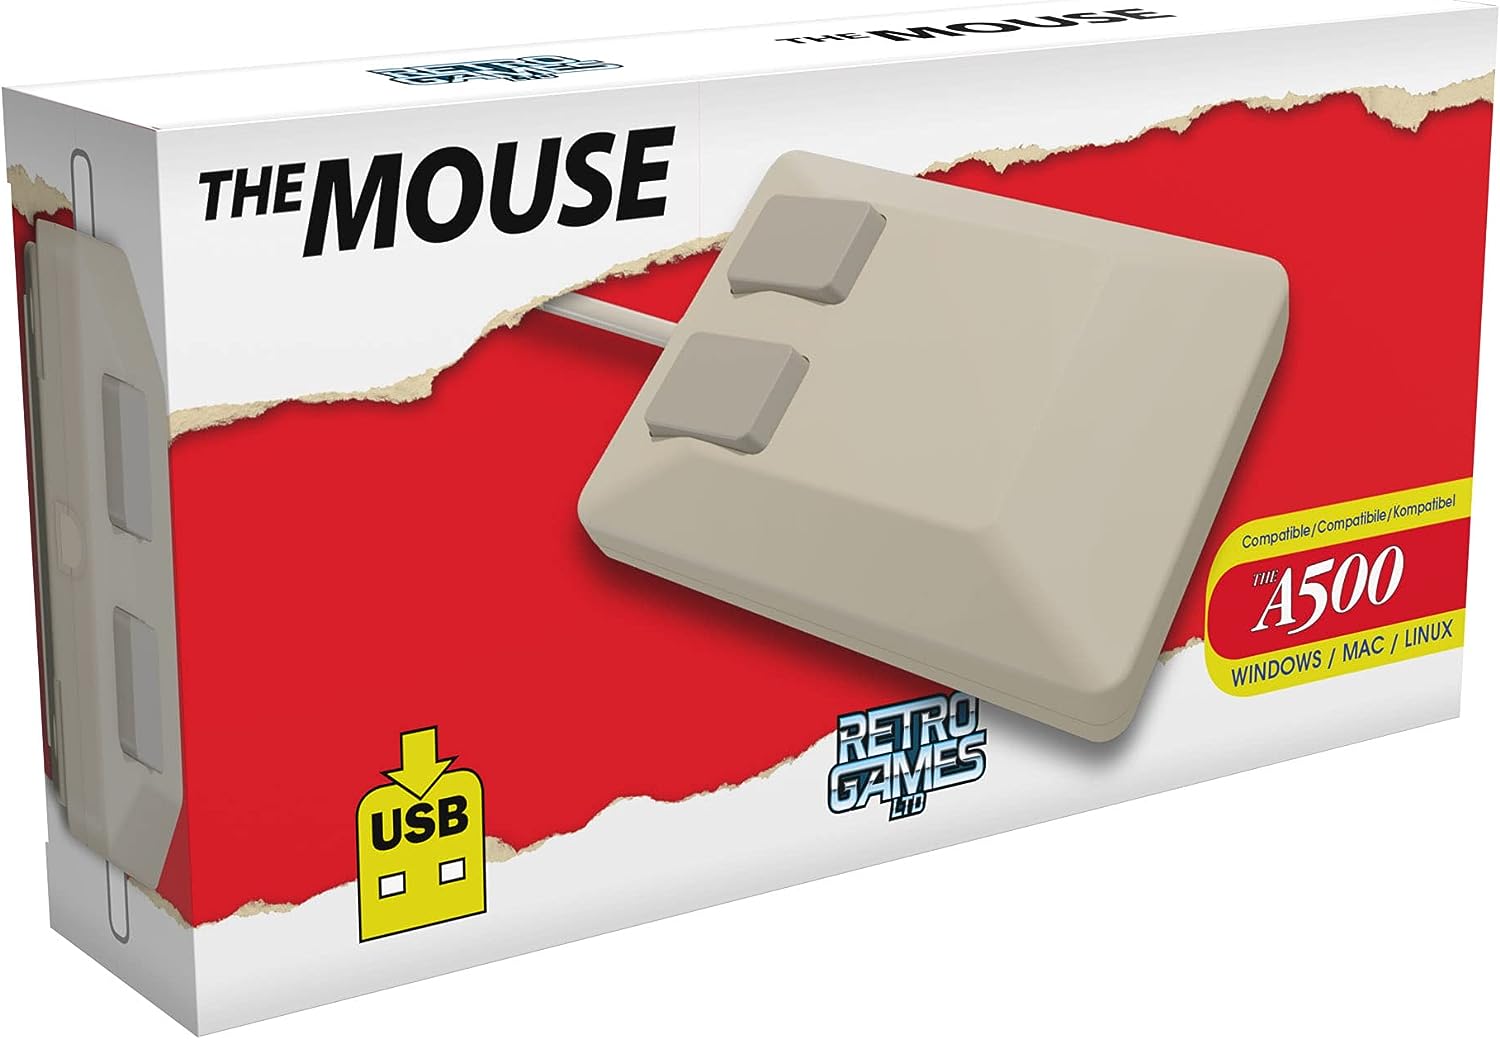 The A500 Mouse